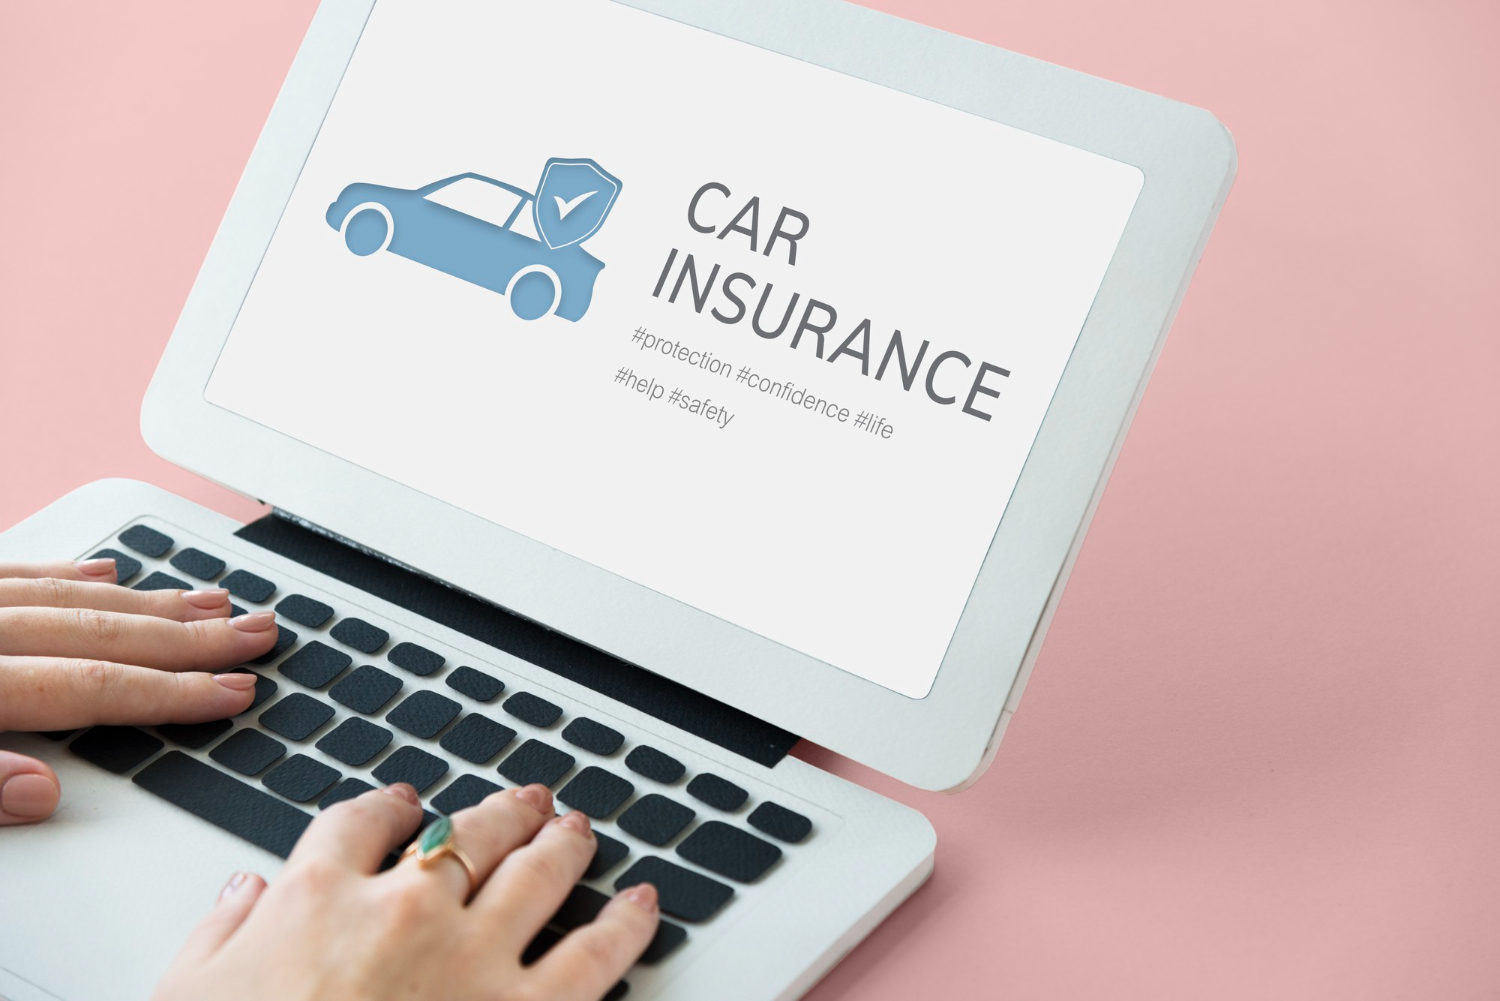 How The Insurance Value of Cars Are Calculated